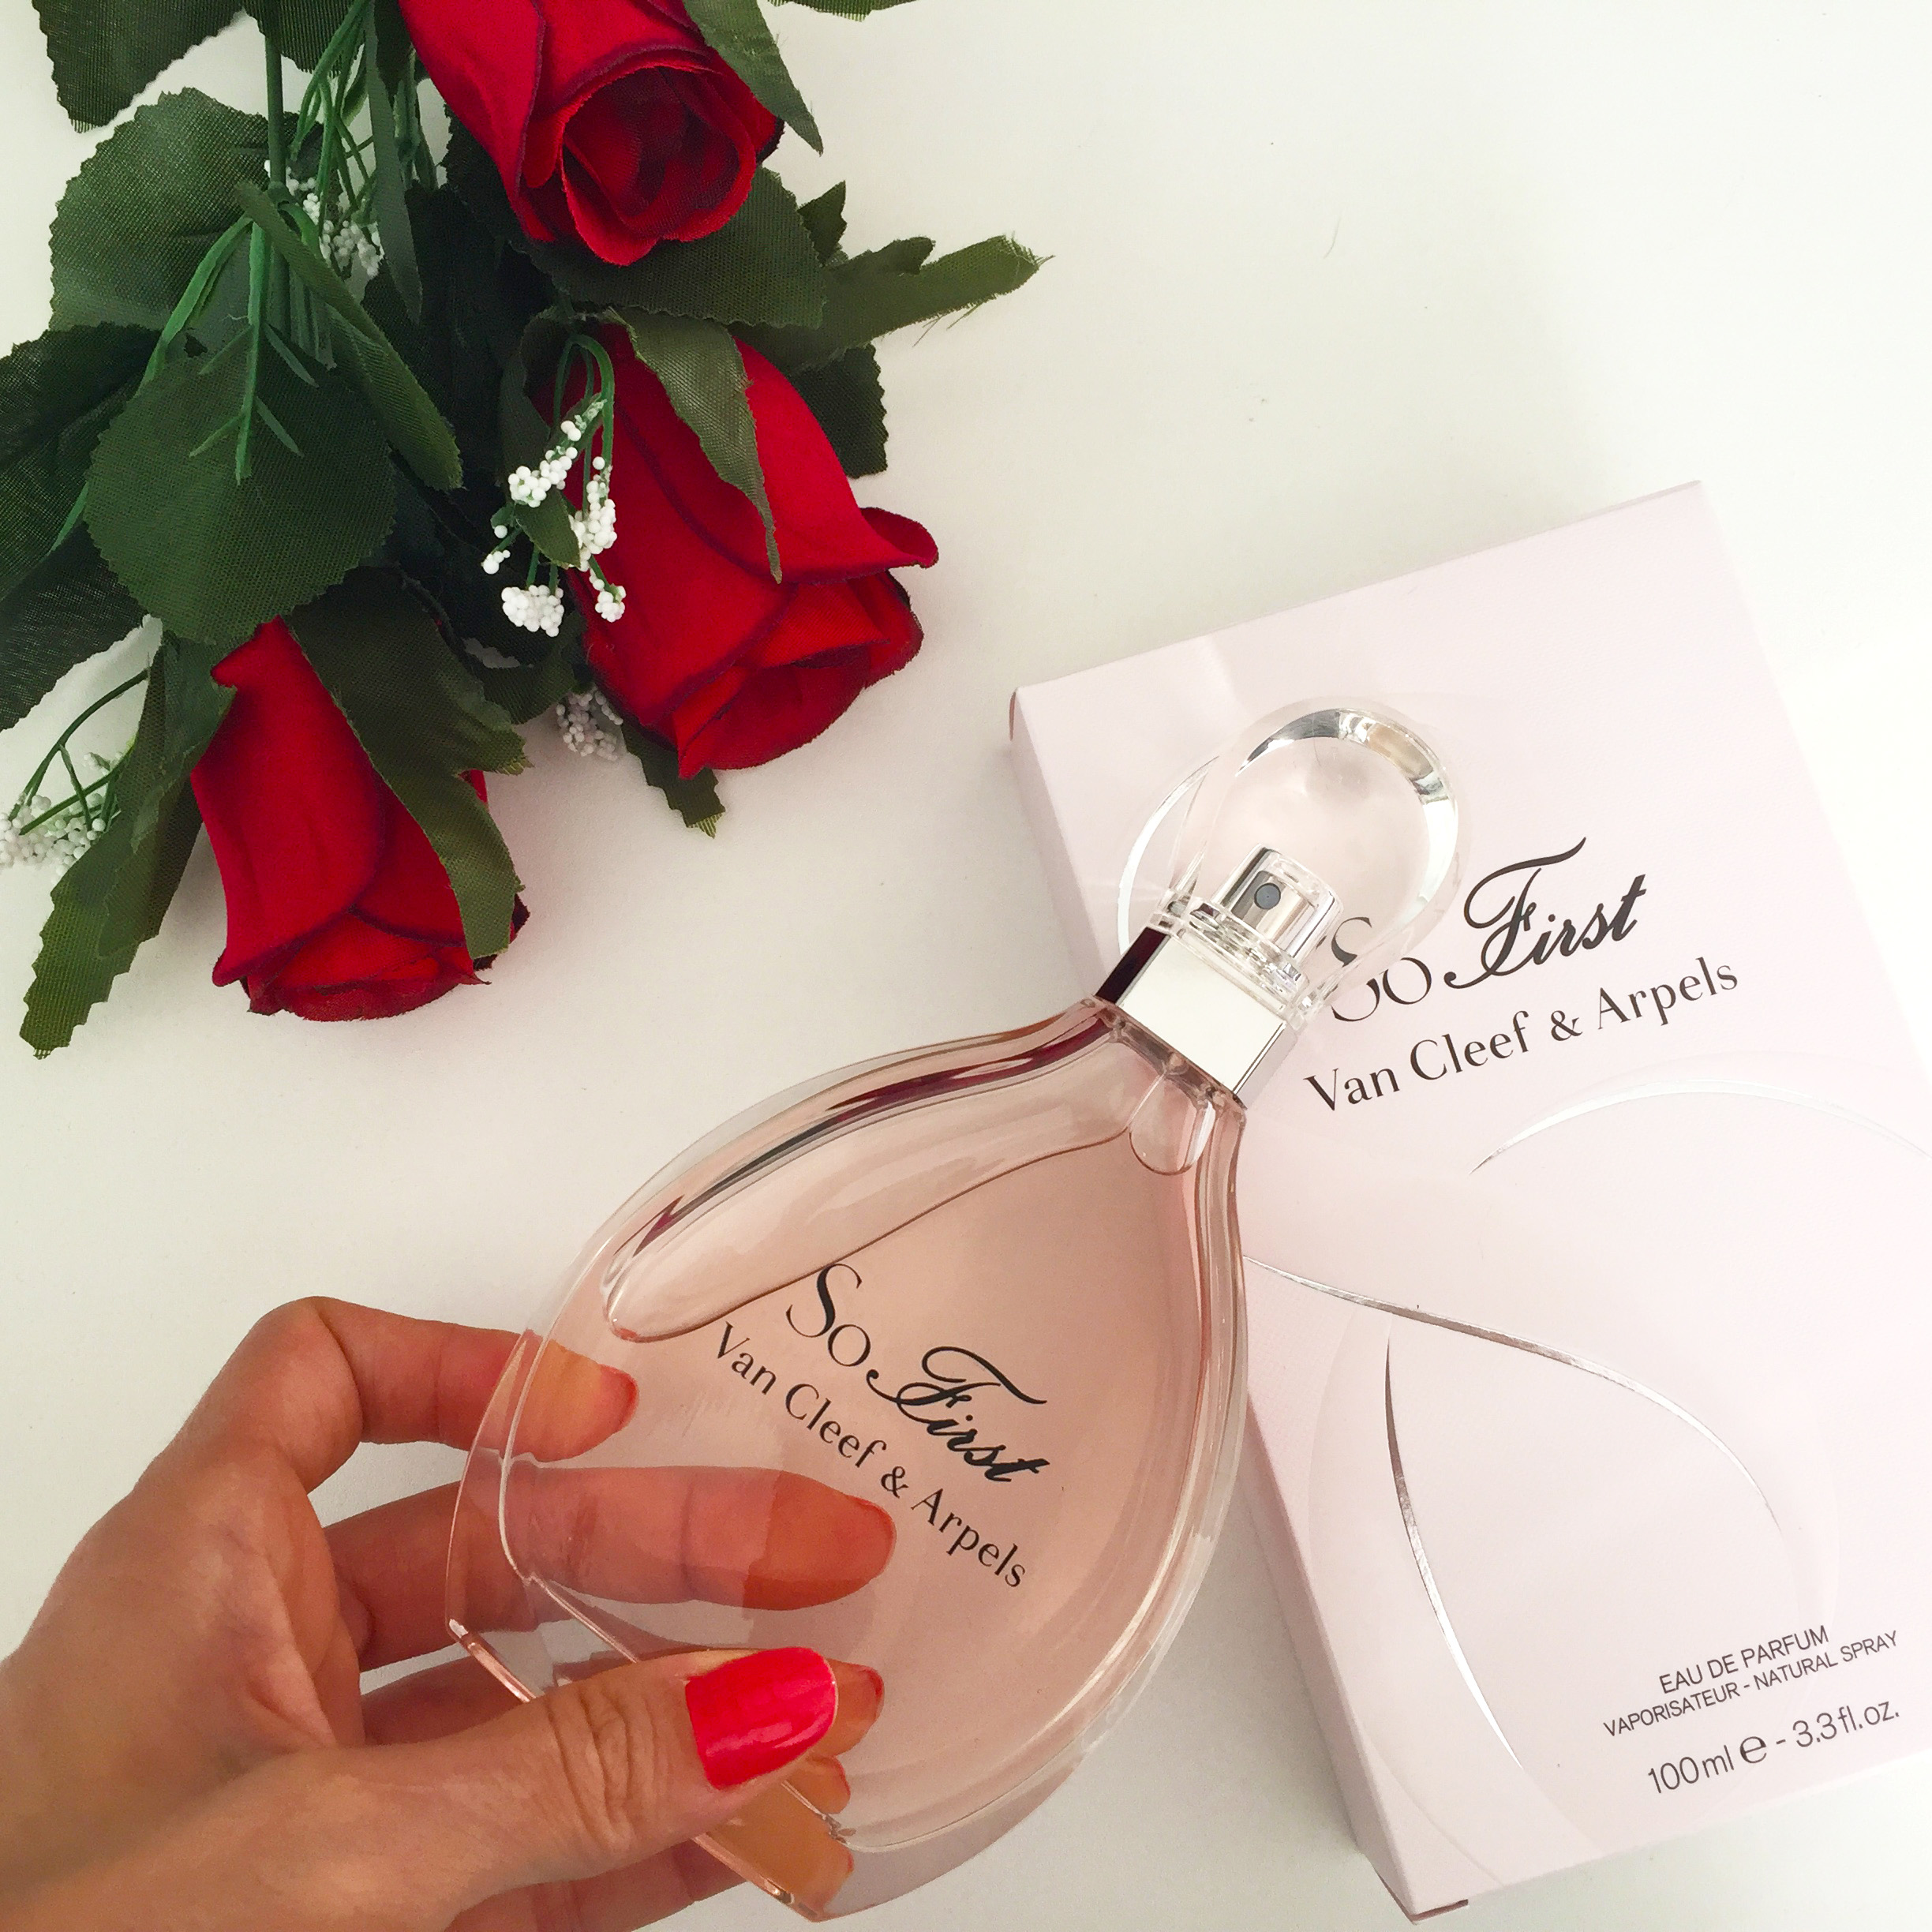 So First Maggie Dallosoedale Parfum Beauty Reporter 1